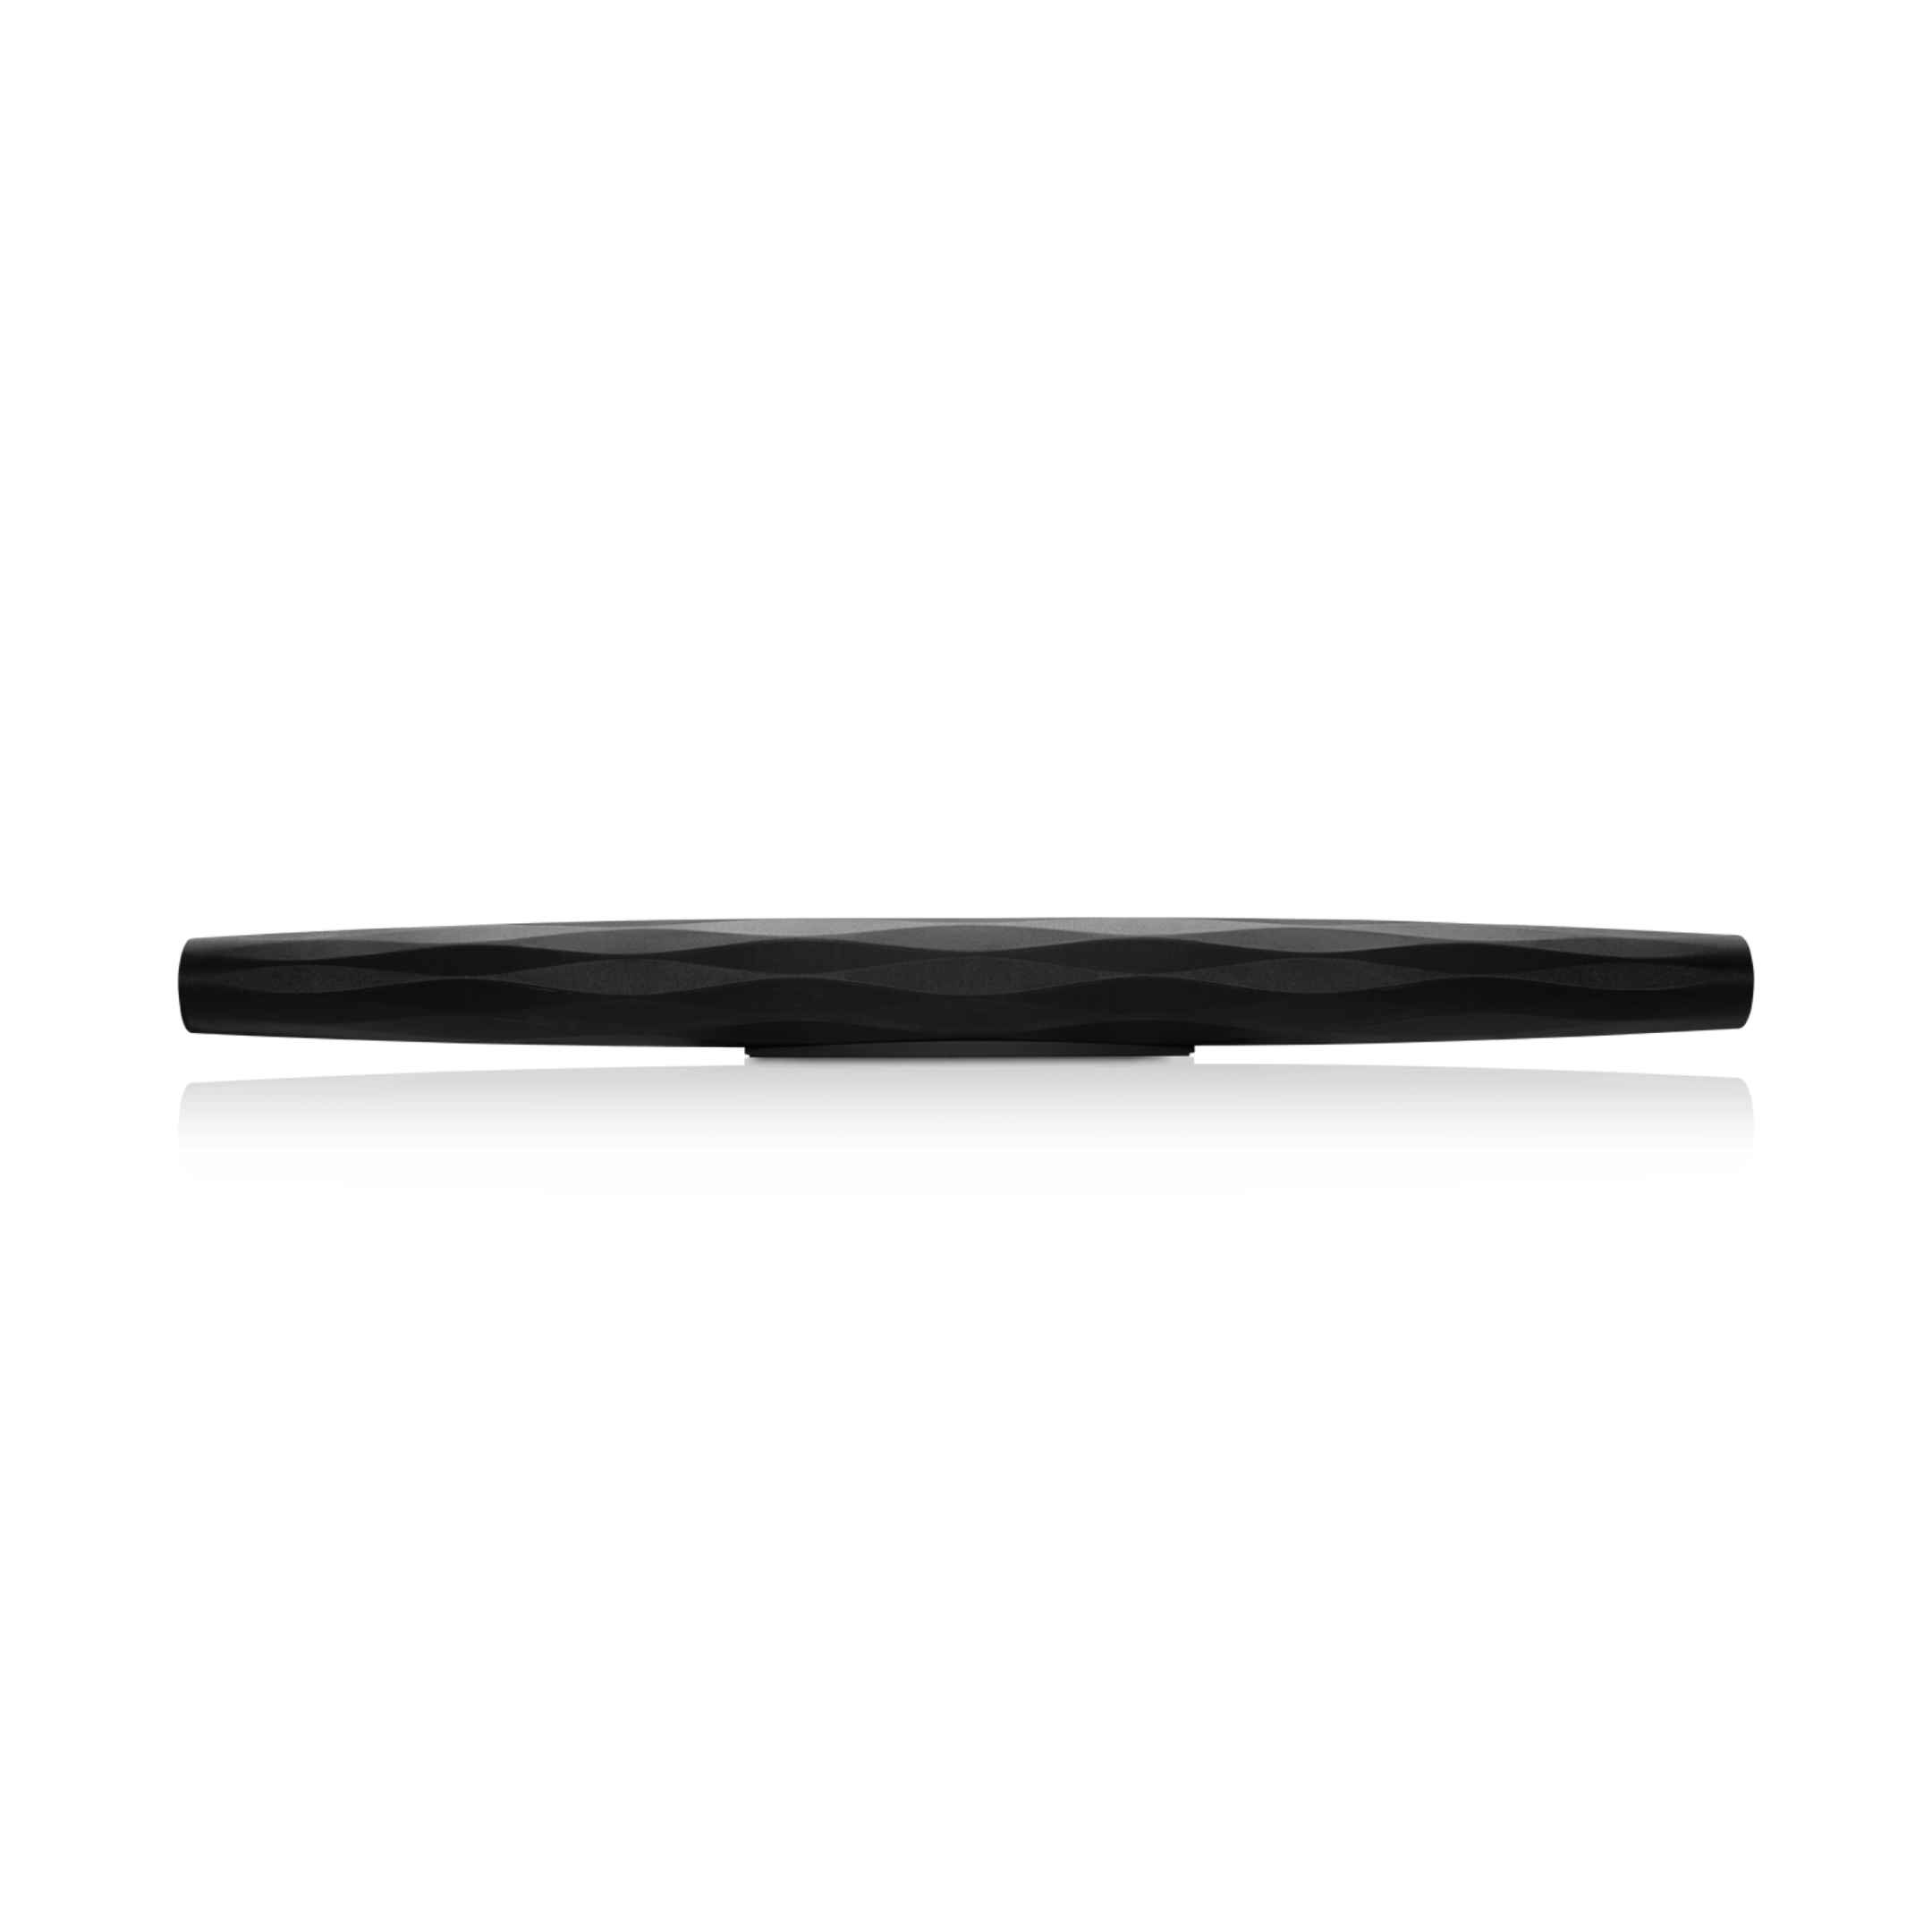 Bowers & Wilkins Formation 3-Channel Sound Bar (Certified Refurbished)